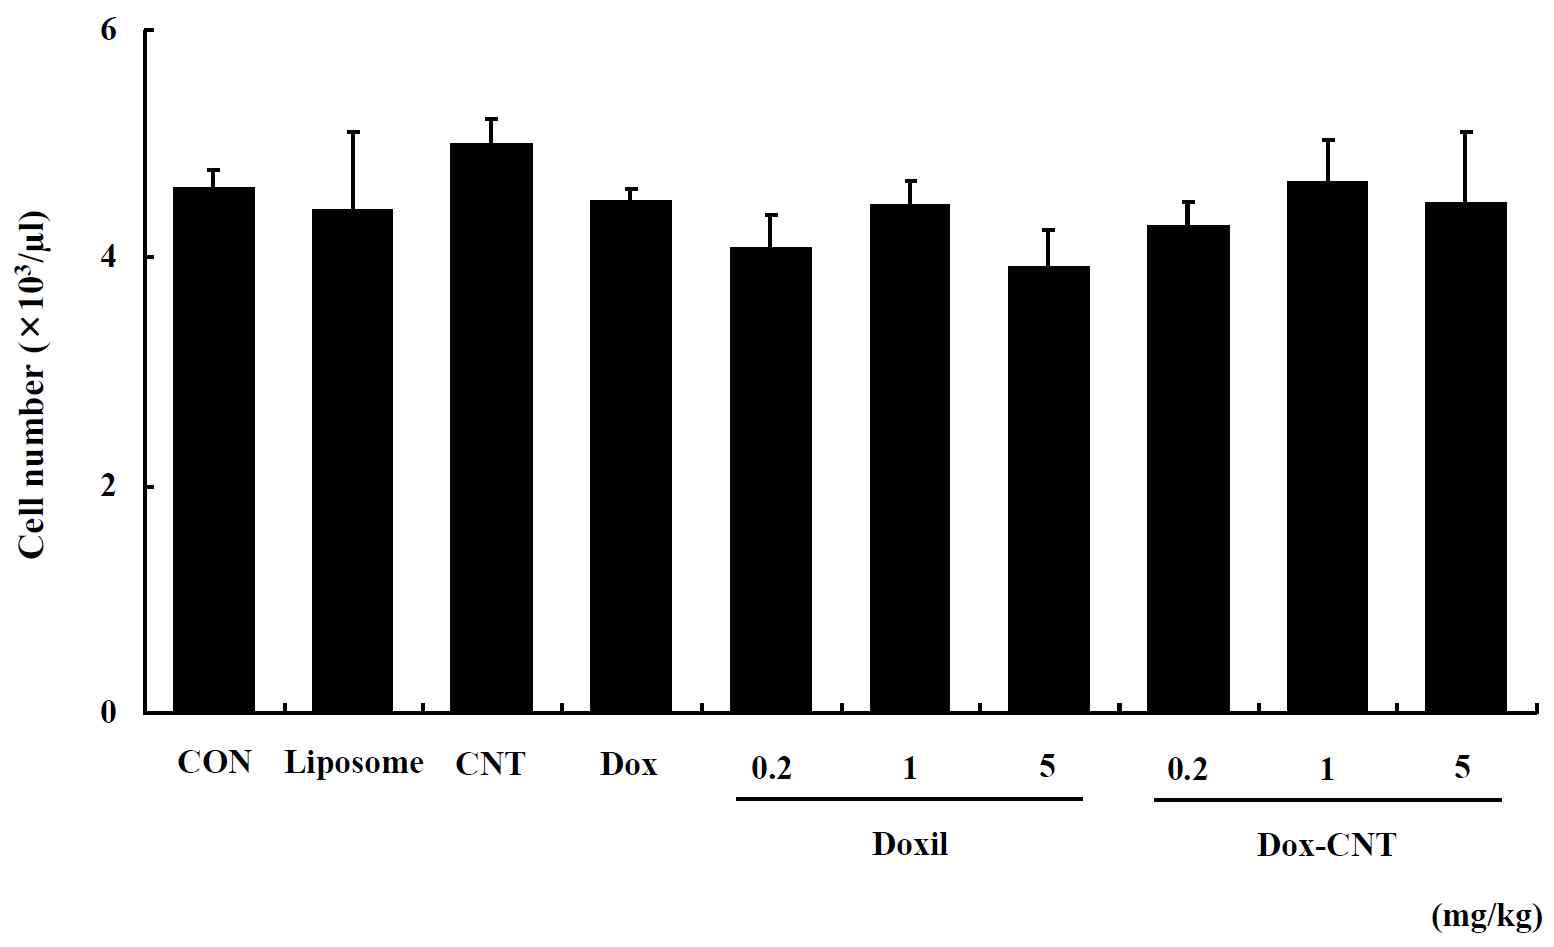 White blood cell counts in single exposed male ICR mice for 14 days. Mice were respectively administered by intravenous injection with liposome, CNT, Dox, Doxil (0.2, 1, 5 mg/kg) and Dox-CNT (0.2, 1, 5 mg/kg). The results are presented as mean ± SE (n = 10). * p < 0.05, significantly different from the control